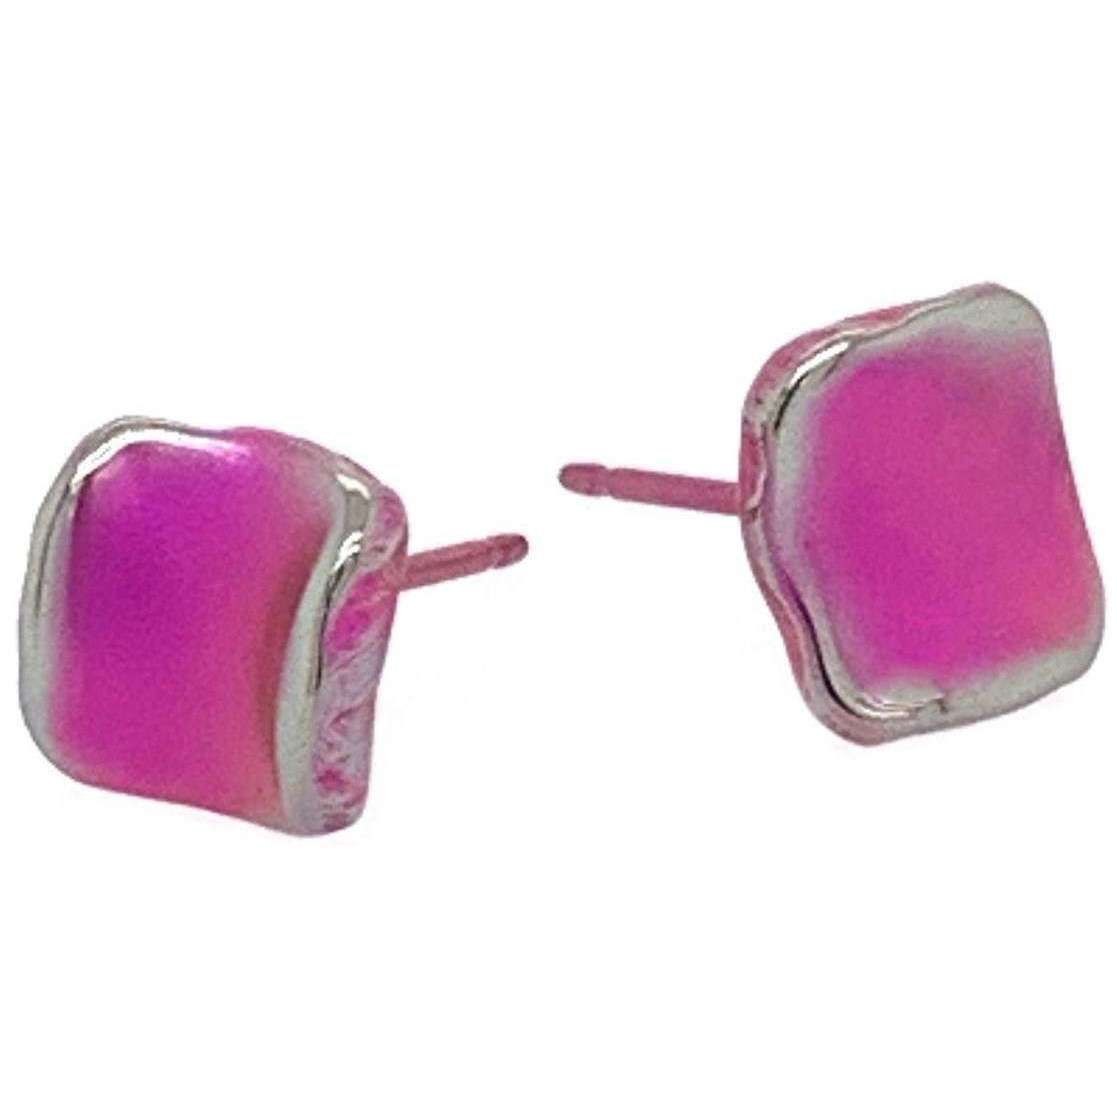 Ti2 Titanium Squashed 8mm Square Stud Earrings - Candy Pink